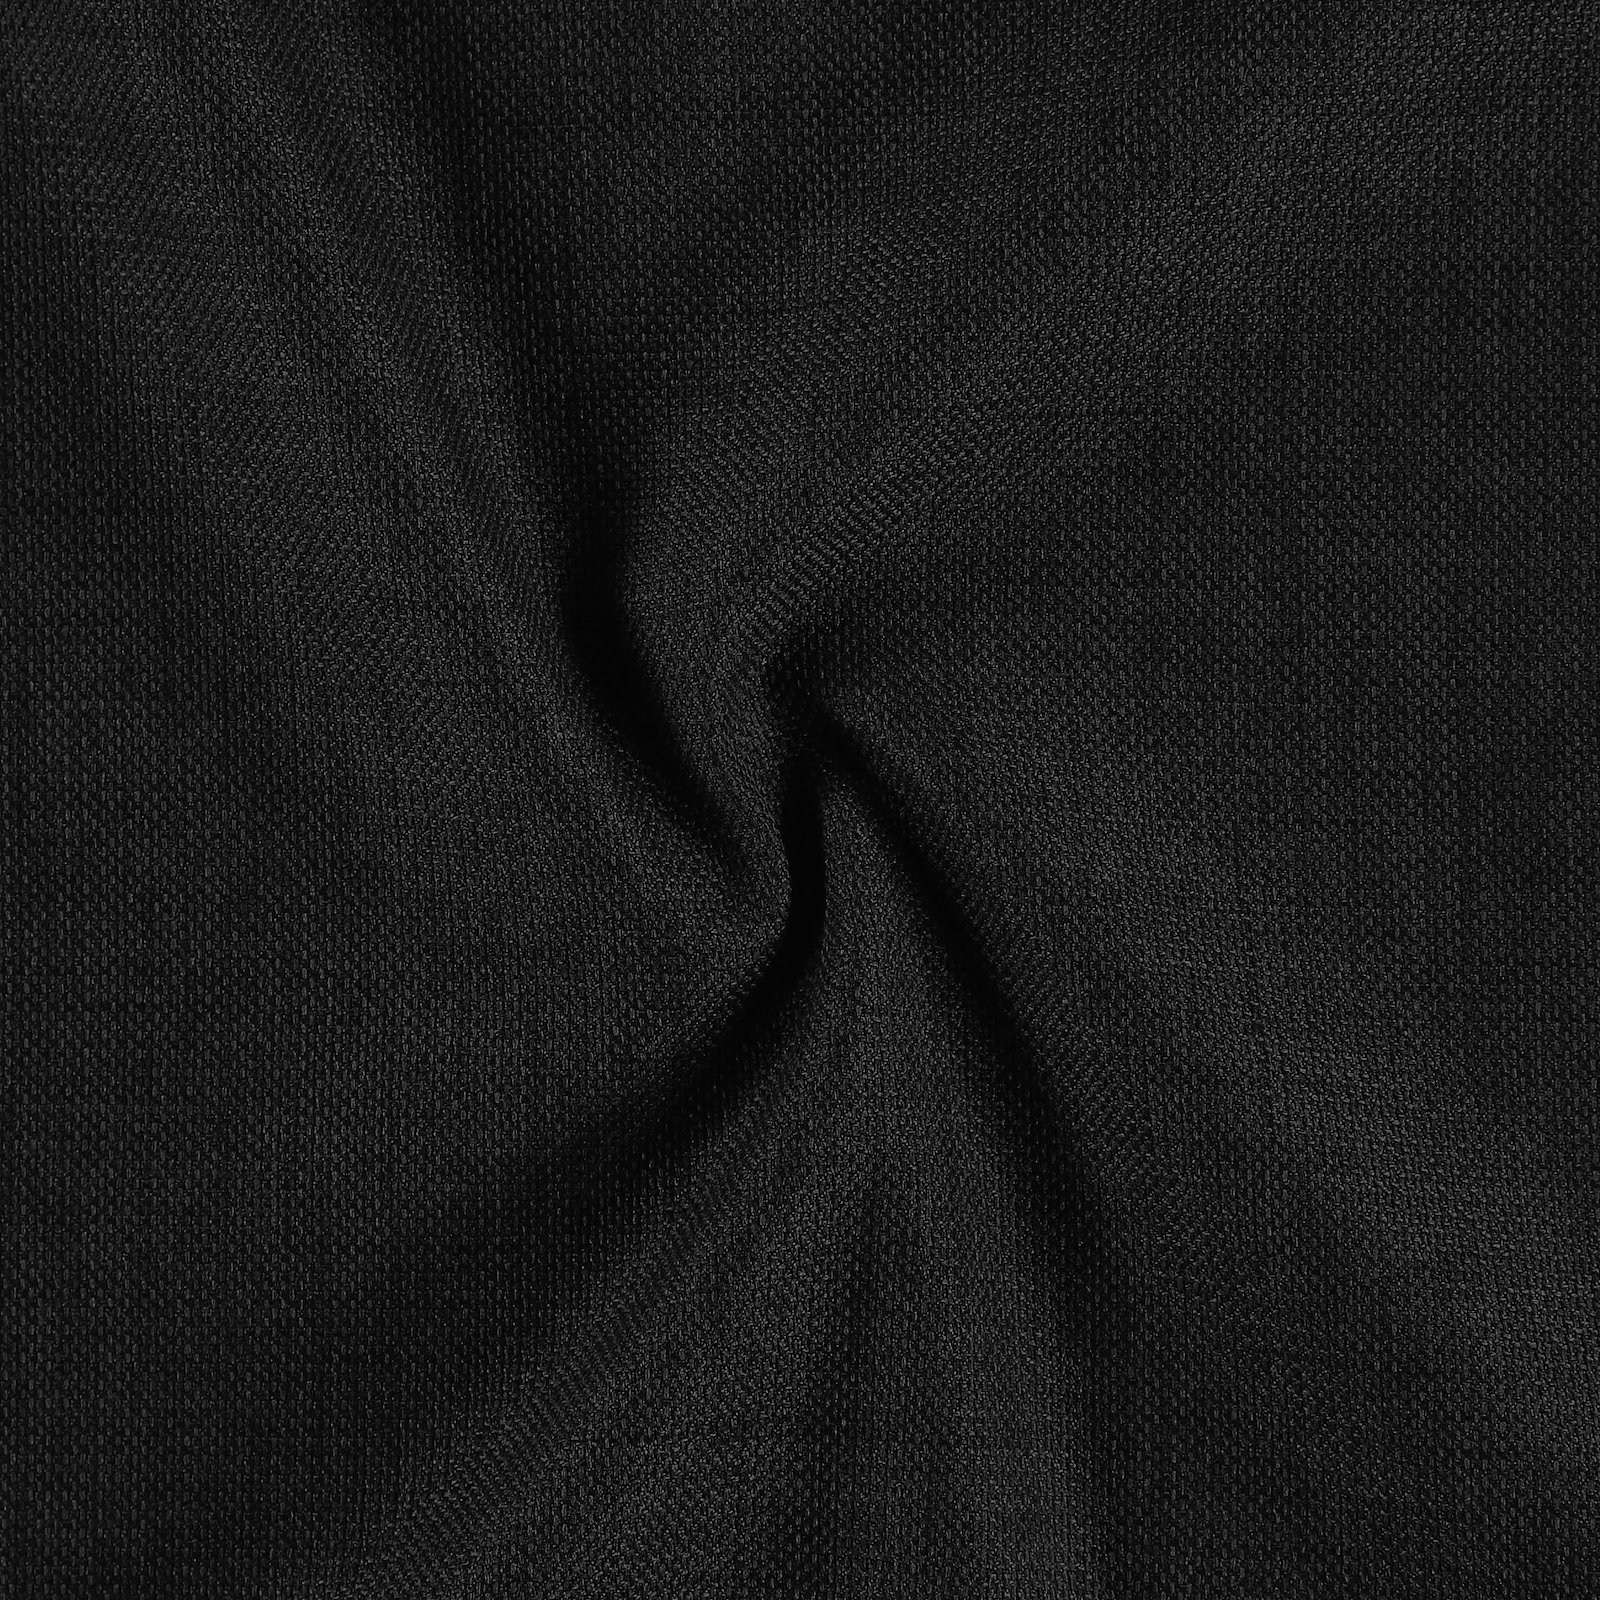 Upholstery fabric black 820978_pack